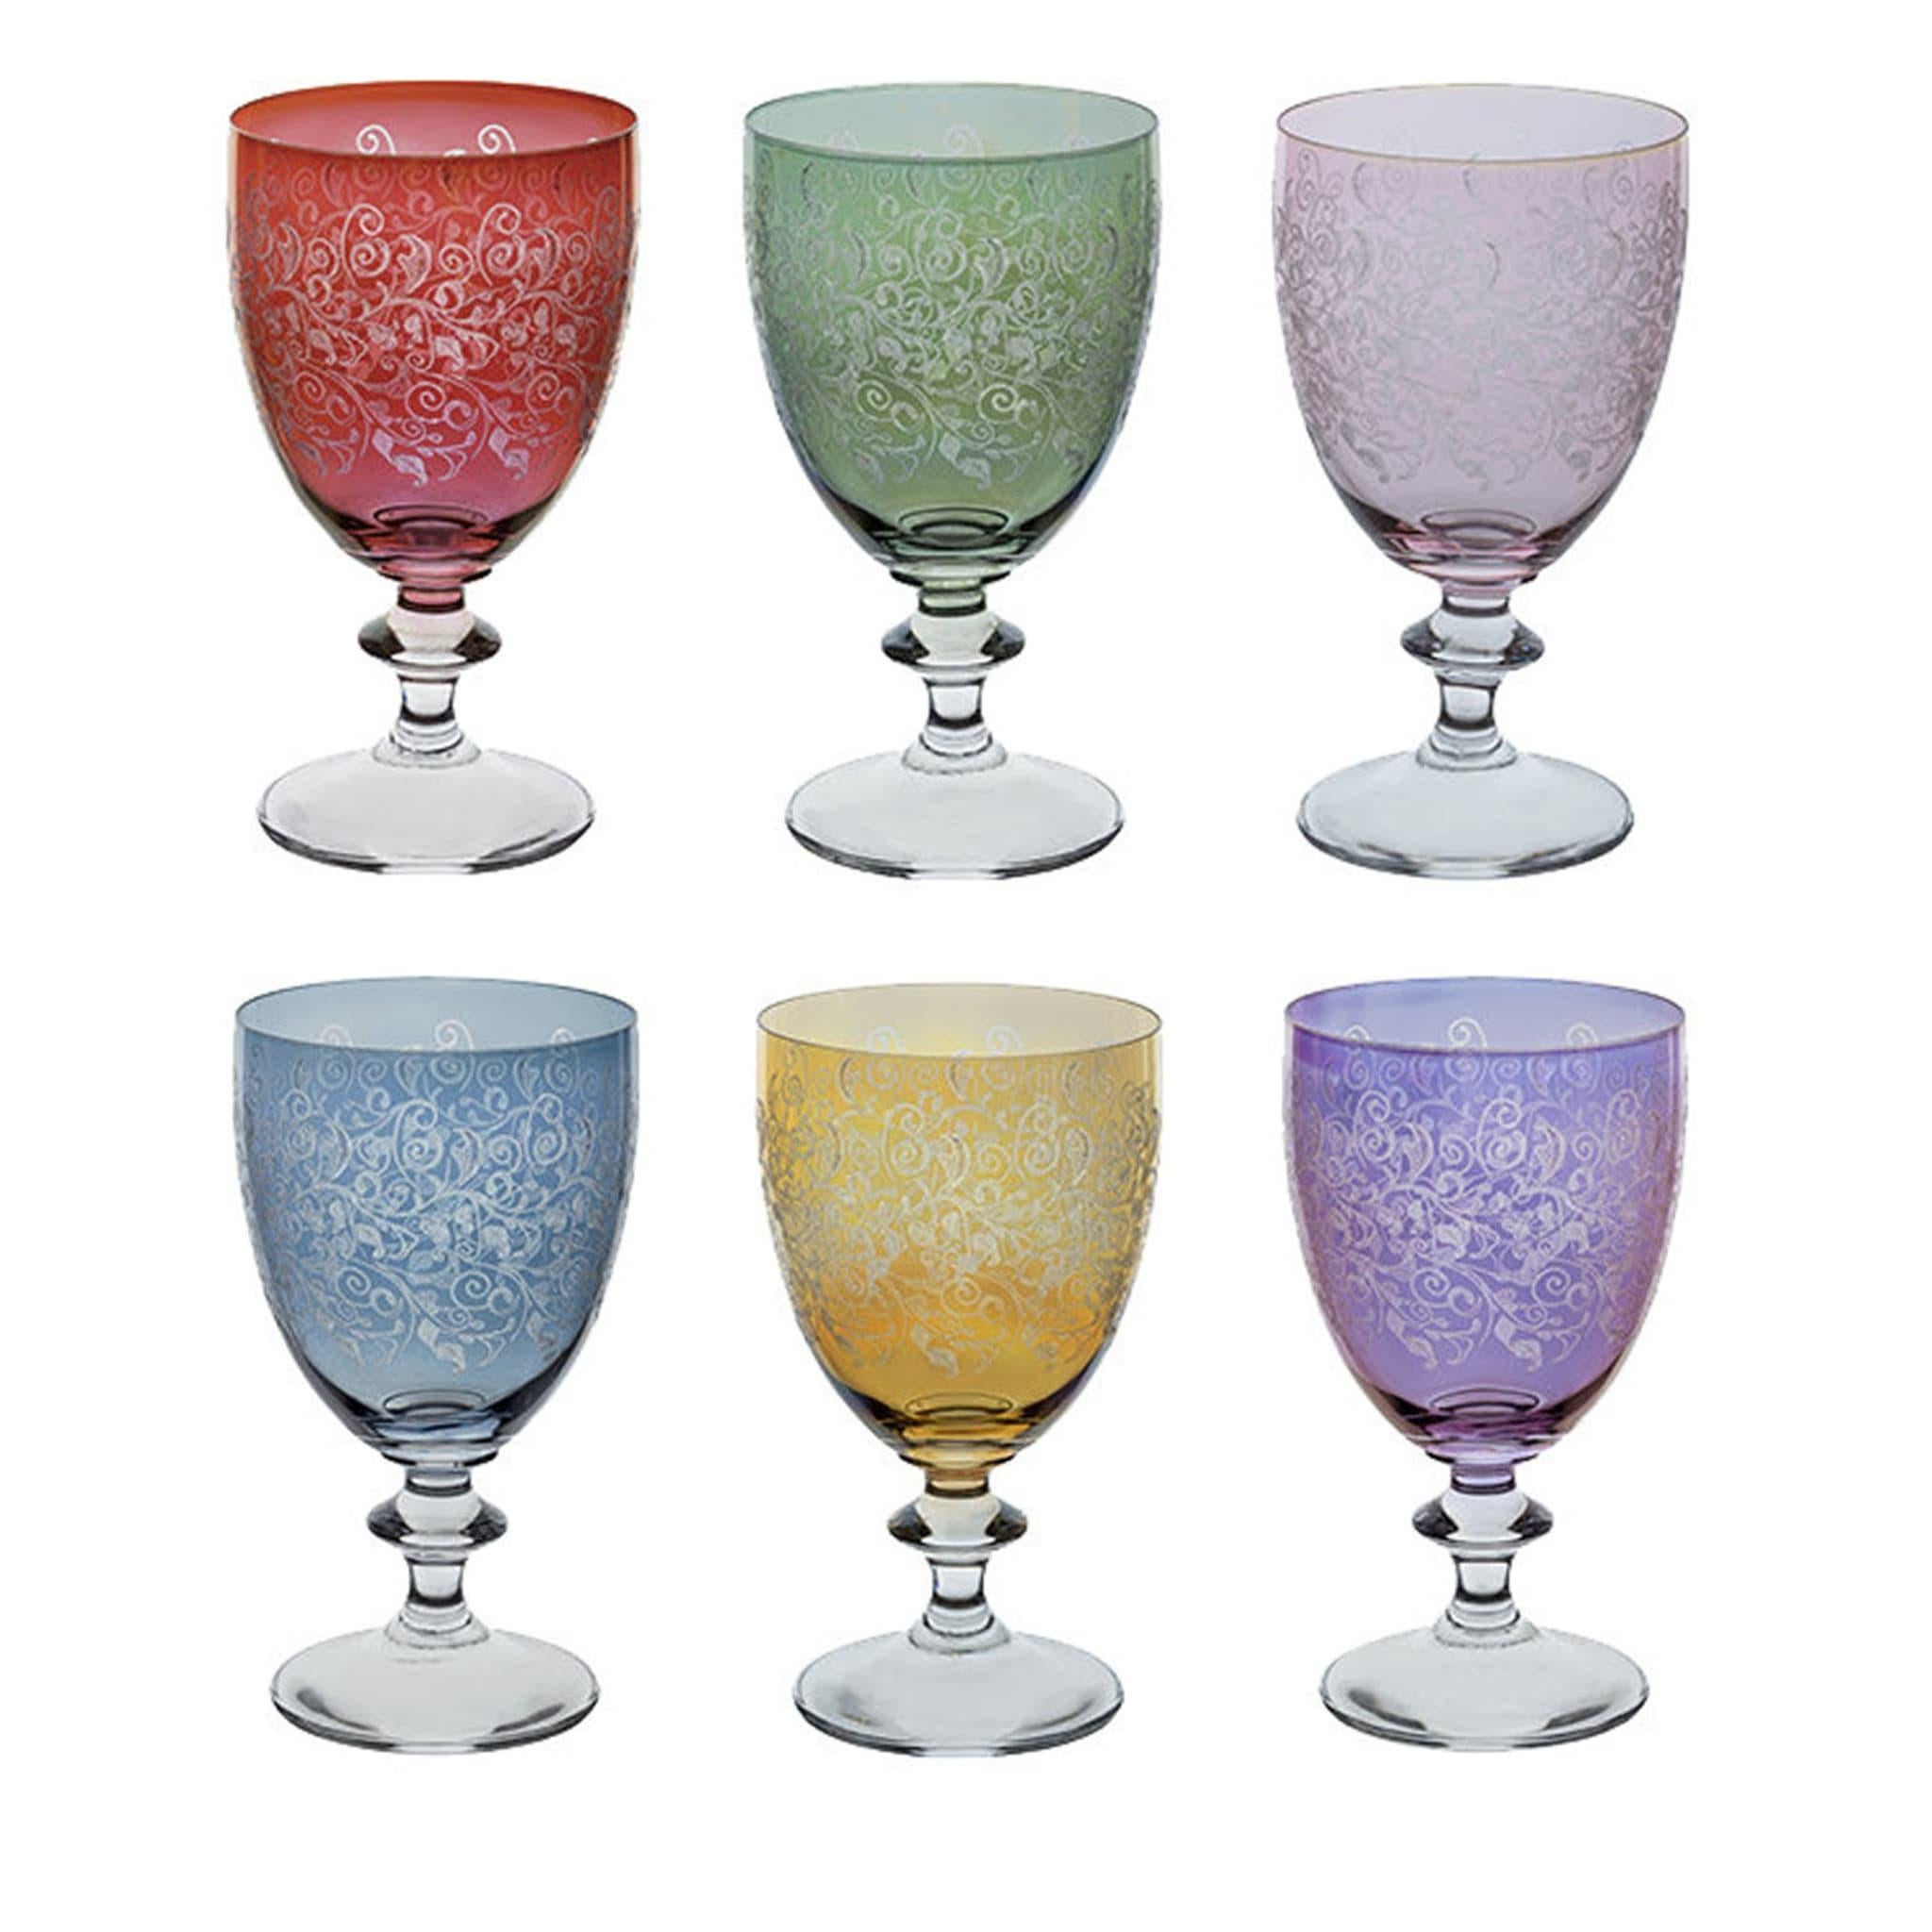 Either alone or combined with the other pieces of the Ravel collection, this set of six stem glasses will enliven the look of any table, thanks to its colorful rainbow of vivid hues (one for each piece) and its exquisite craftsmanship. Each glass